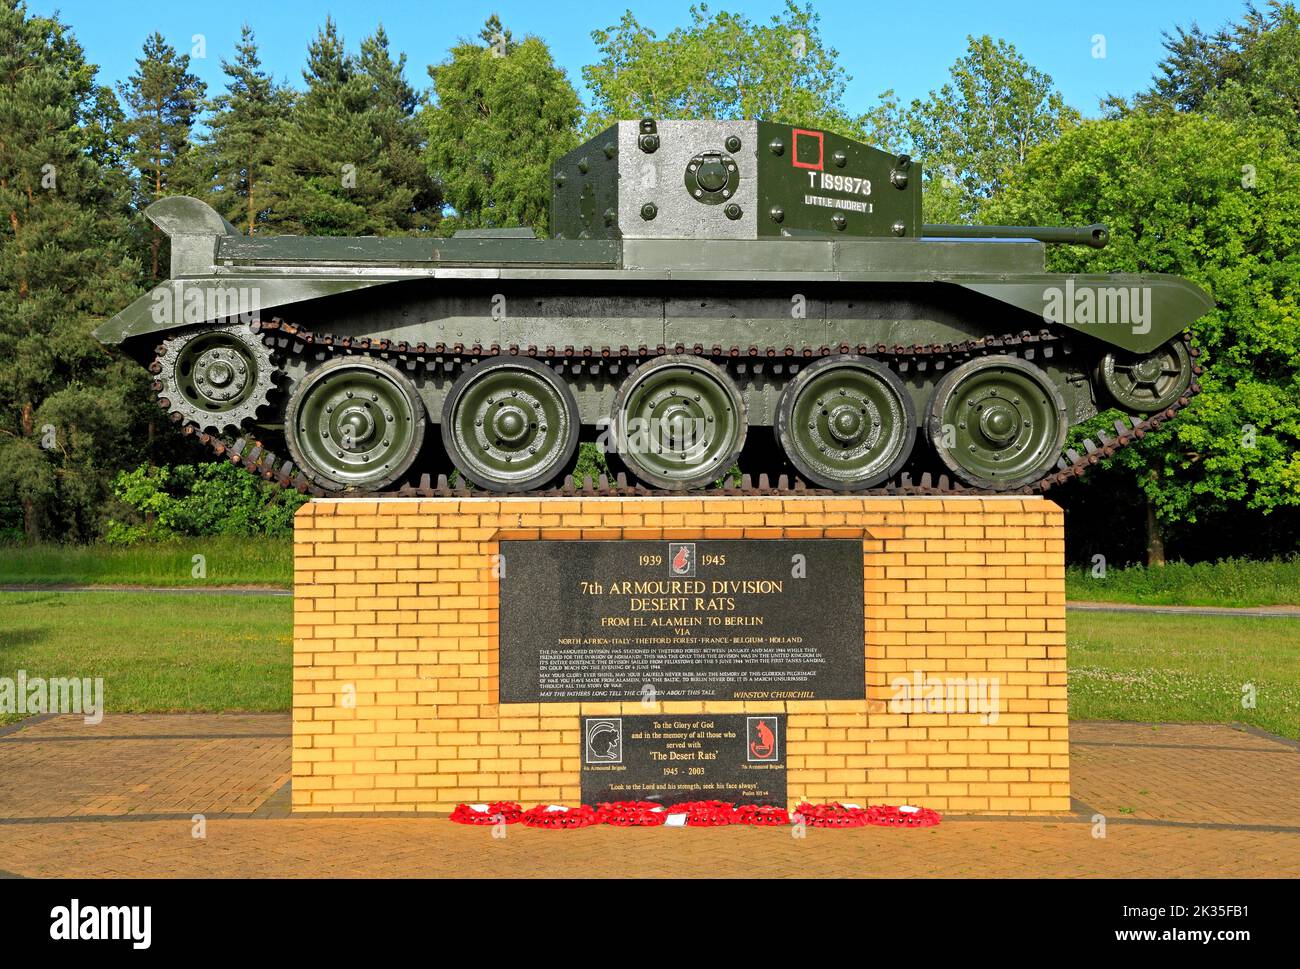 Desert Rats Memorial, 7th Armoured Division, Tank, WW2, Thetford Forest, Norfolk, England, UK 2 Stock Photo